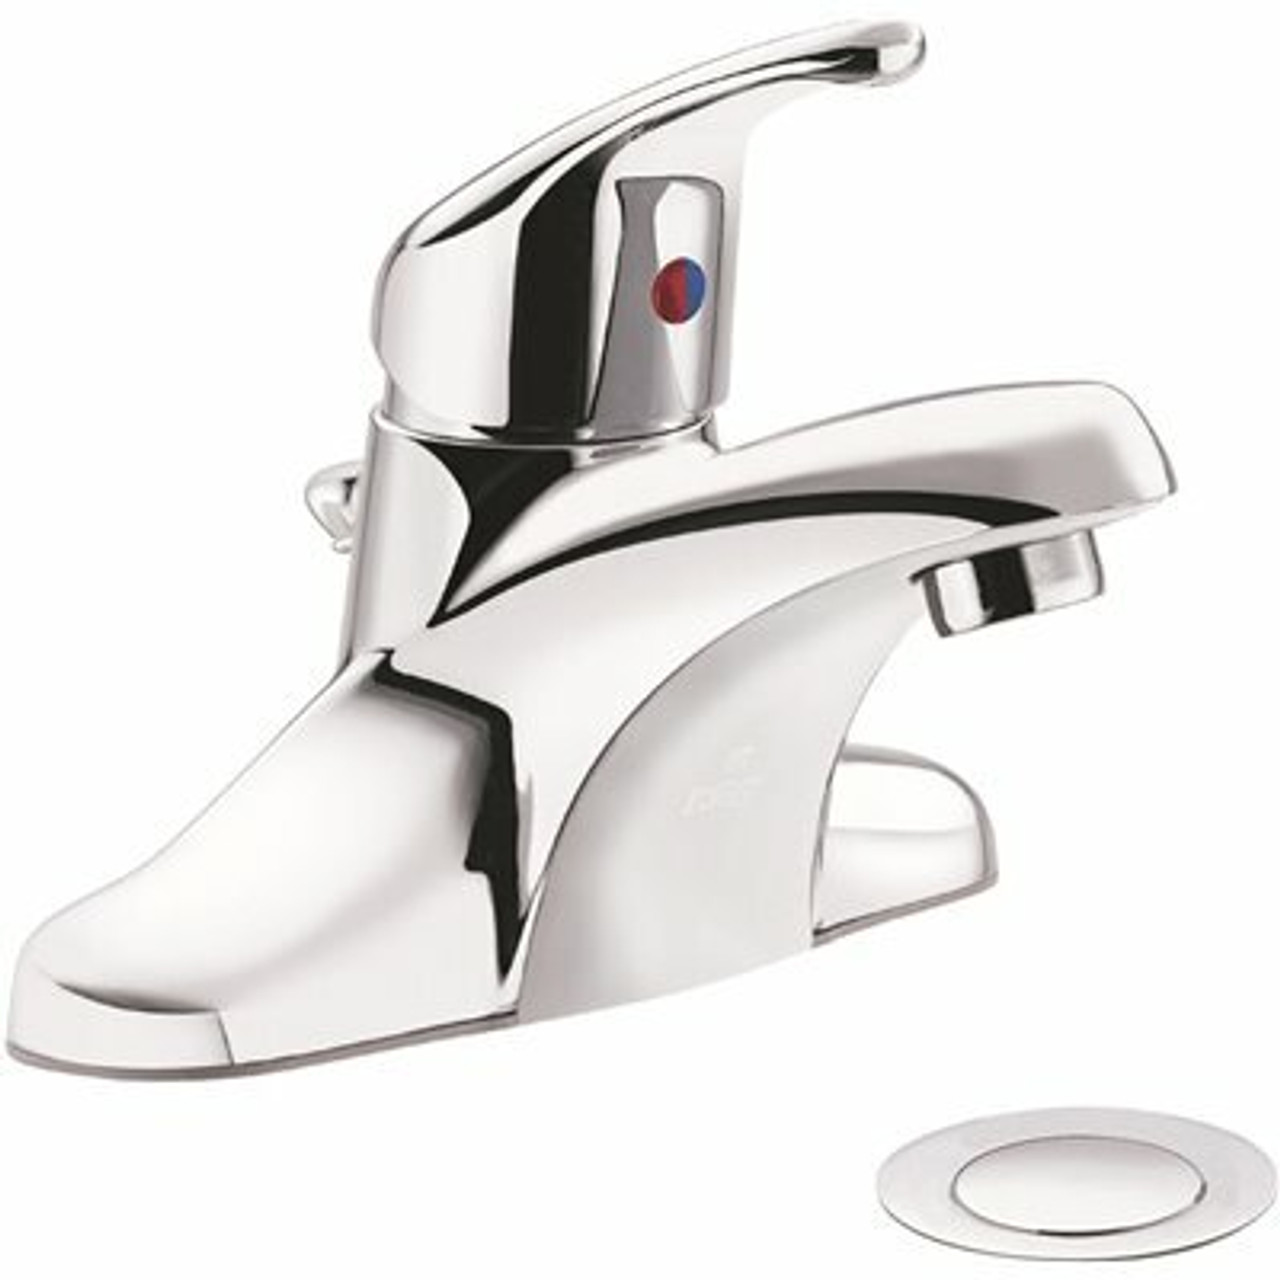 Cleveland Faucet Group Cornerstone 4 In. Centerset Single-Handle Bathroom Faucet With Flexible Supply Lines In Chrome